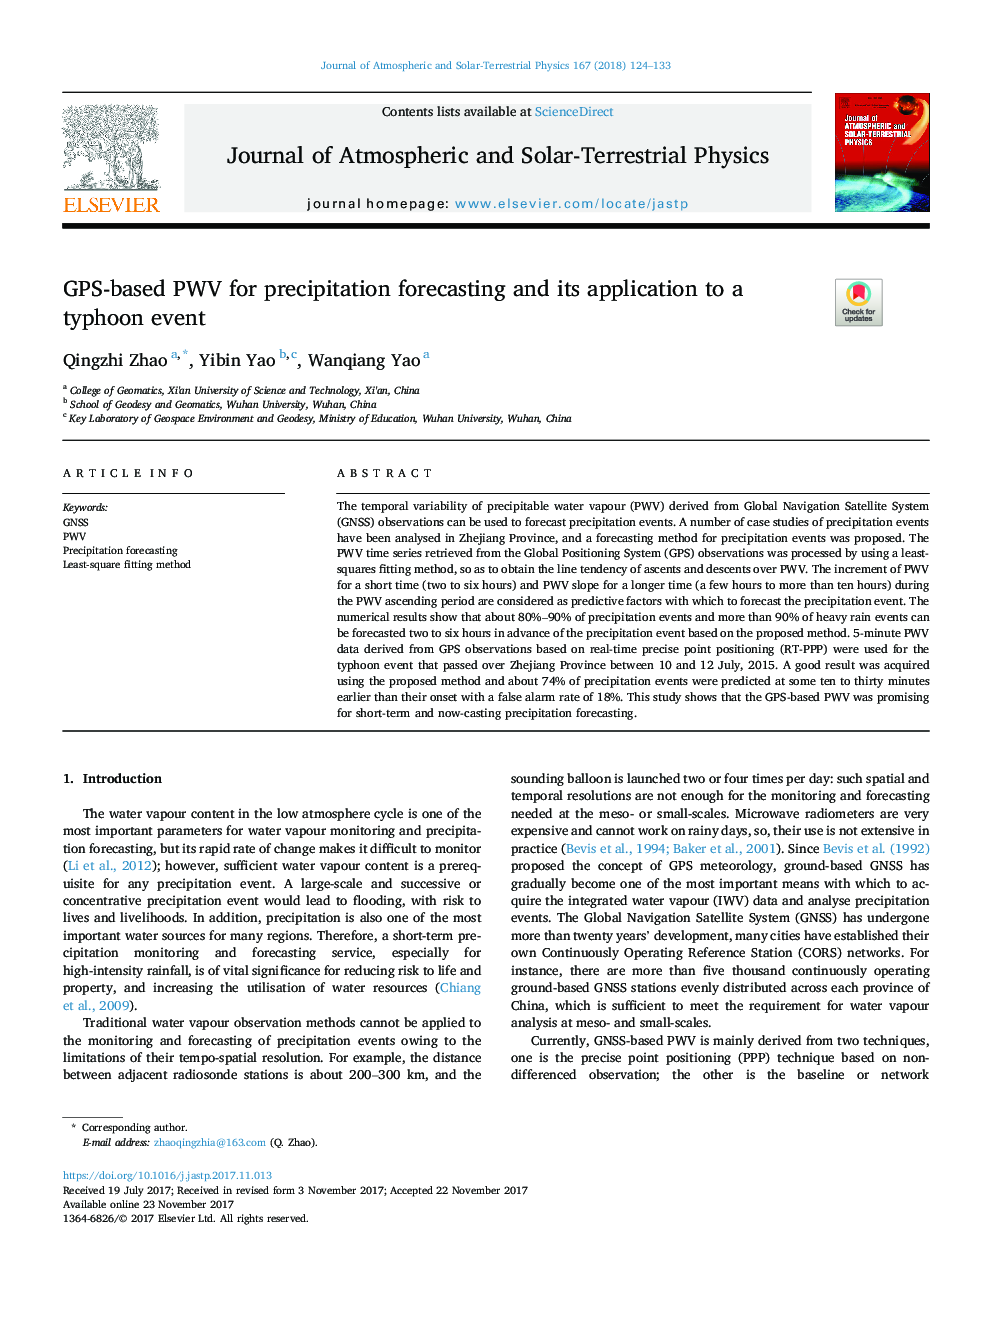 GPS-based PWV for precipitation forecasting and its application to a typhoon event